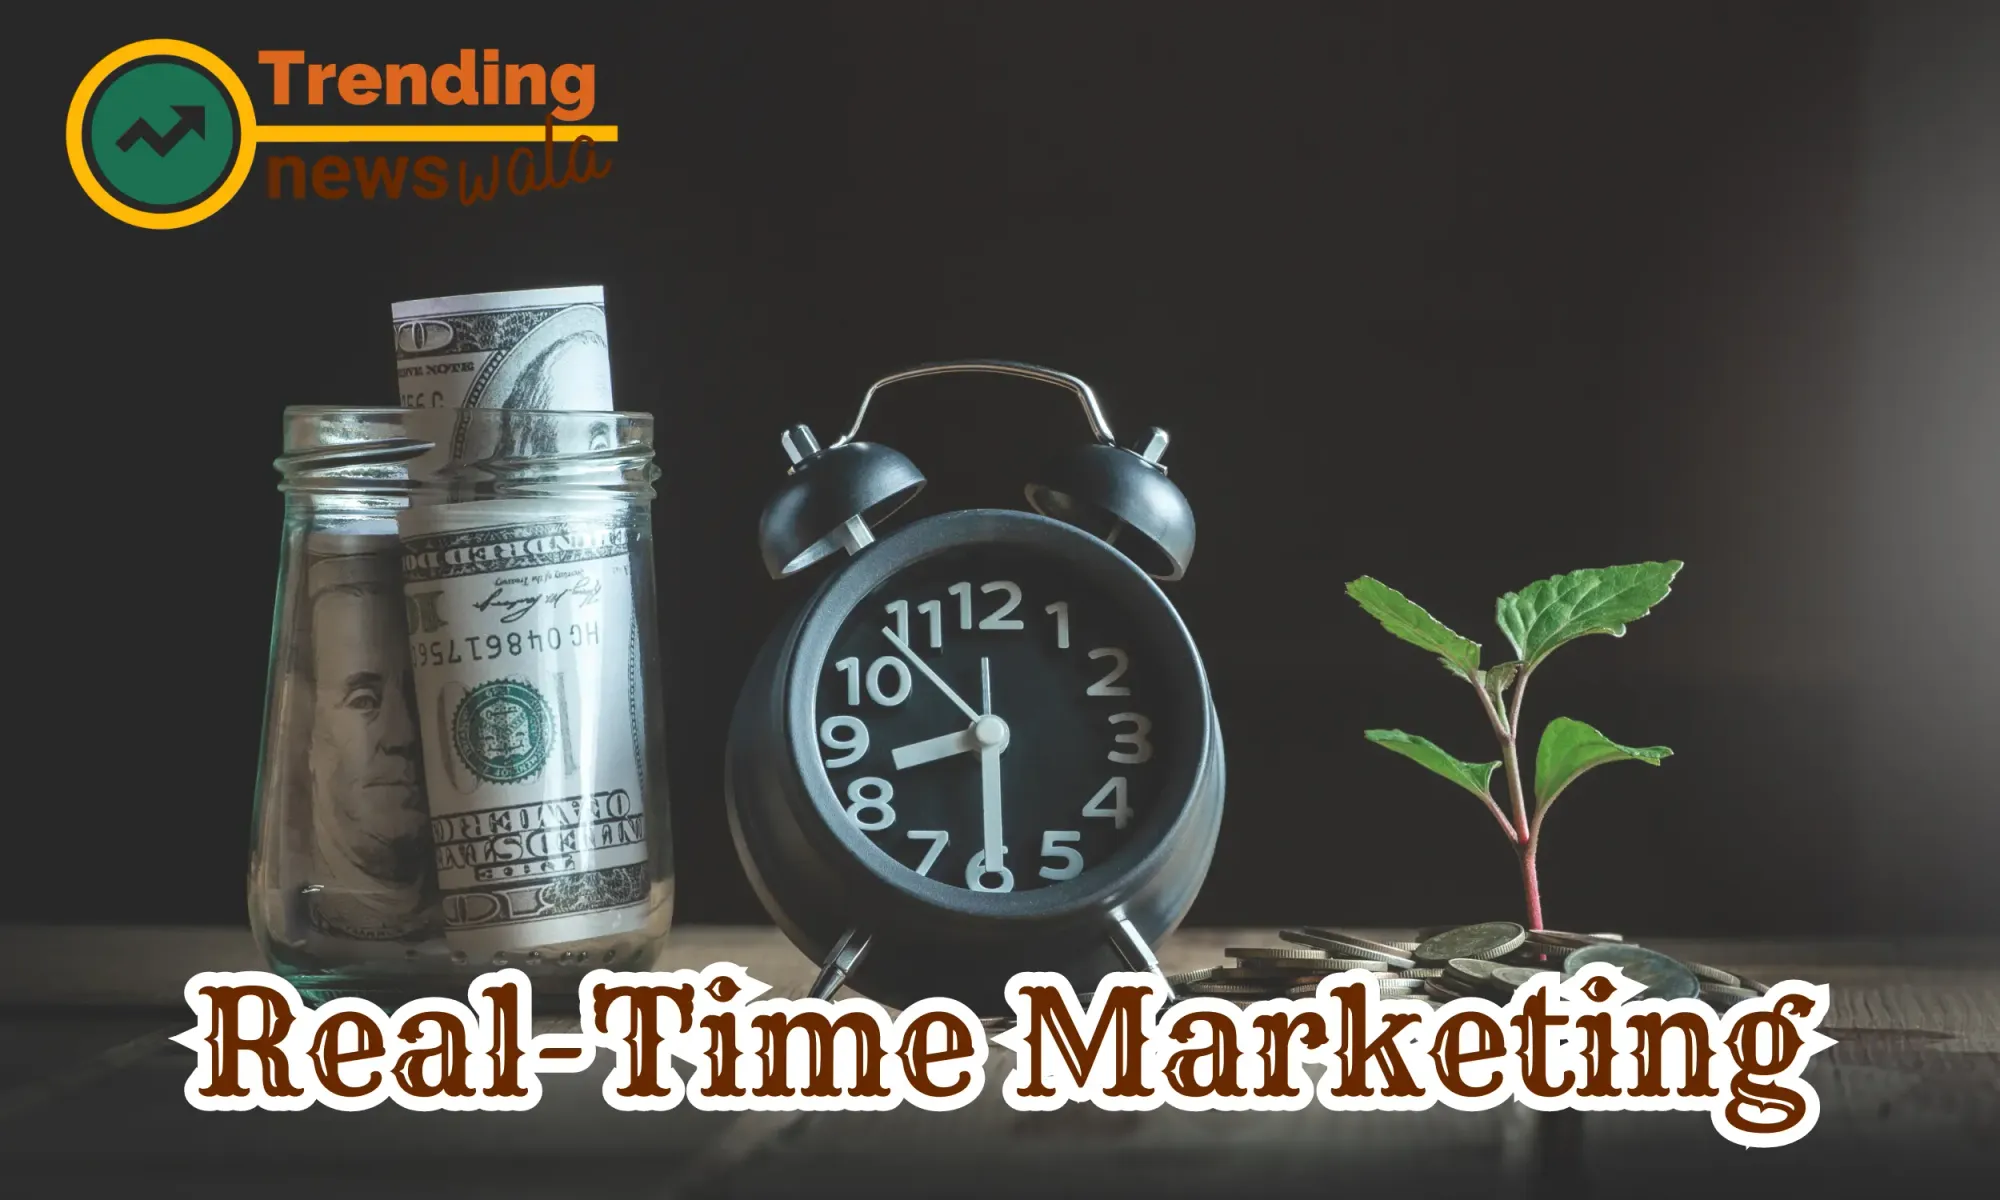 Real-time marketing is a dynamic marketing strategy that involves creating and delivering timely and relevant content